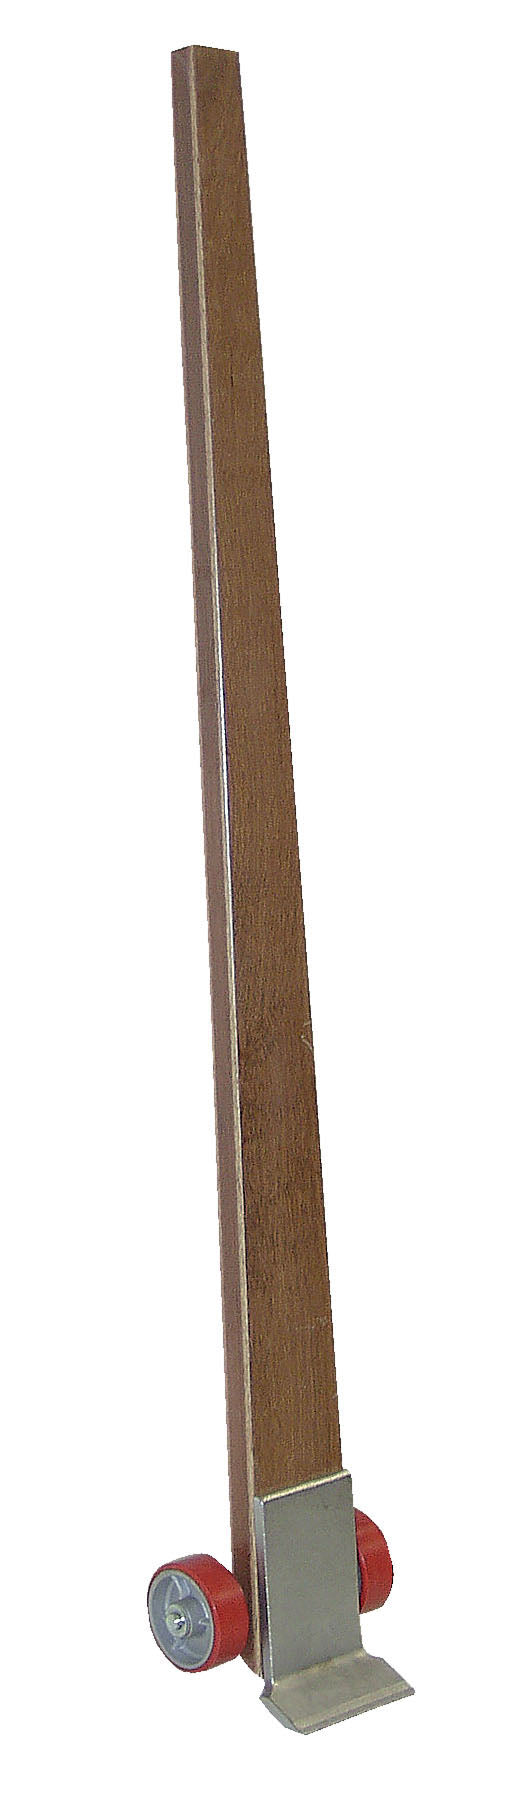 Wood Pry Lever Bar 86" x 11.5" x 11"